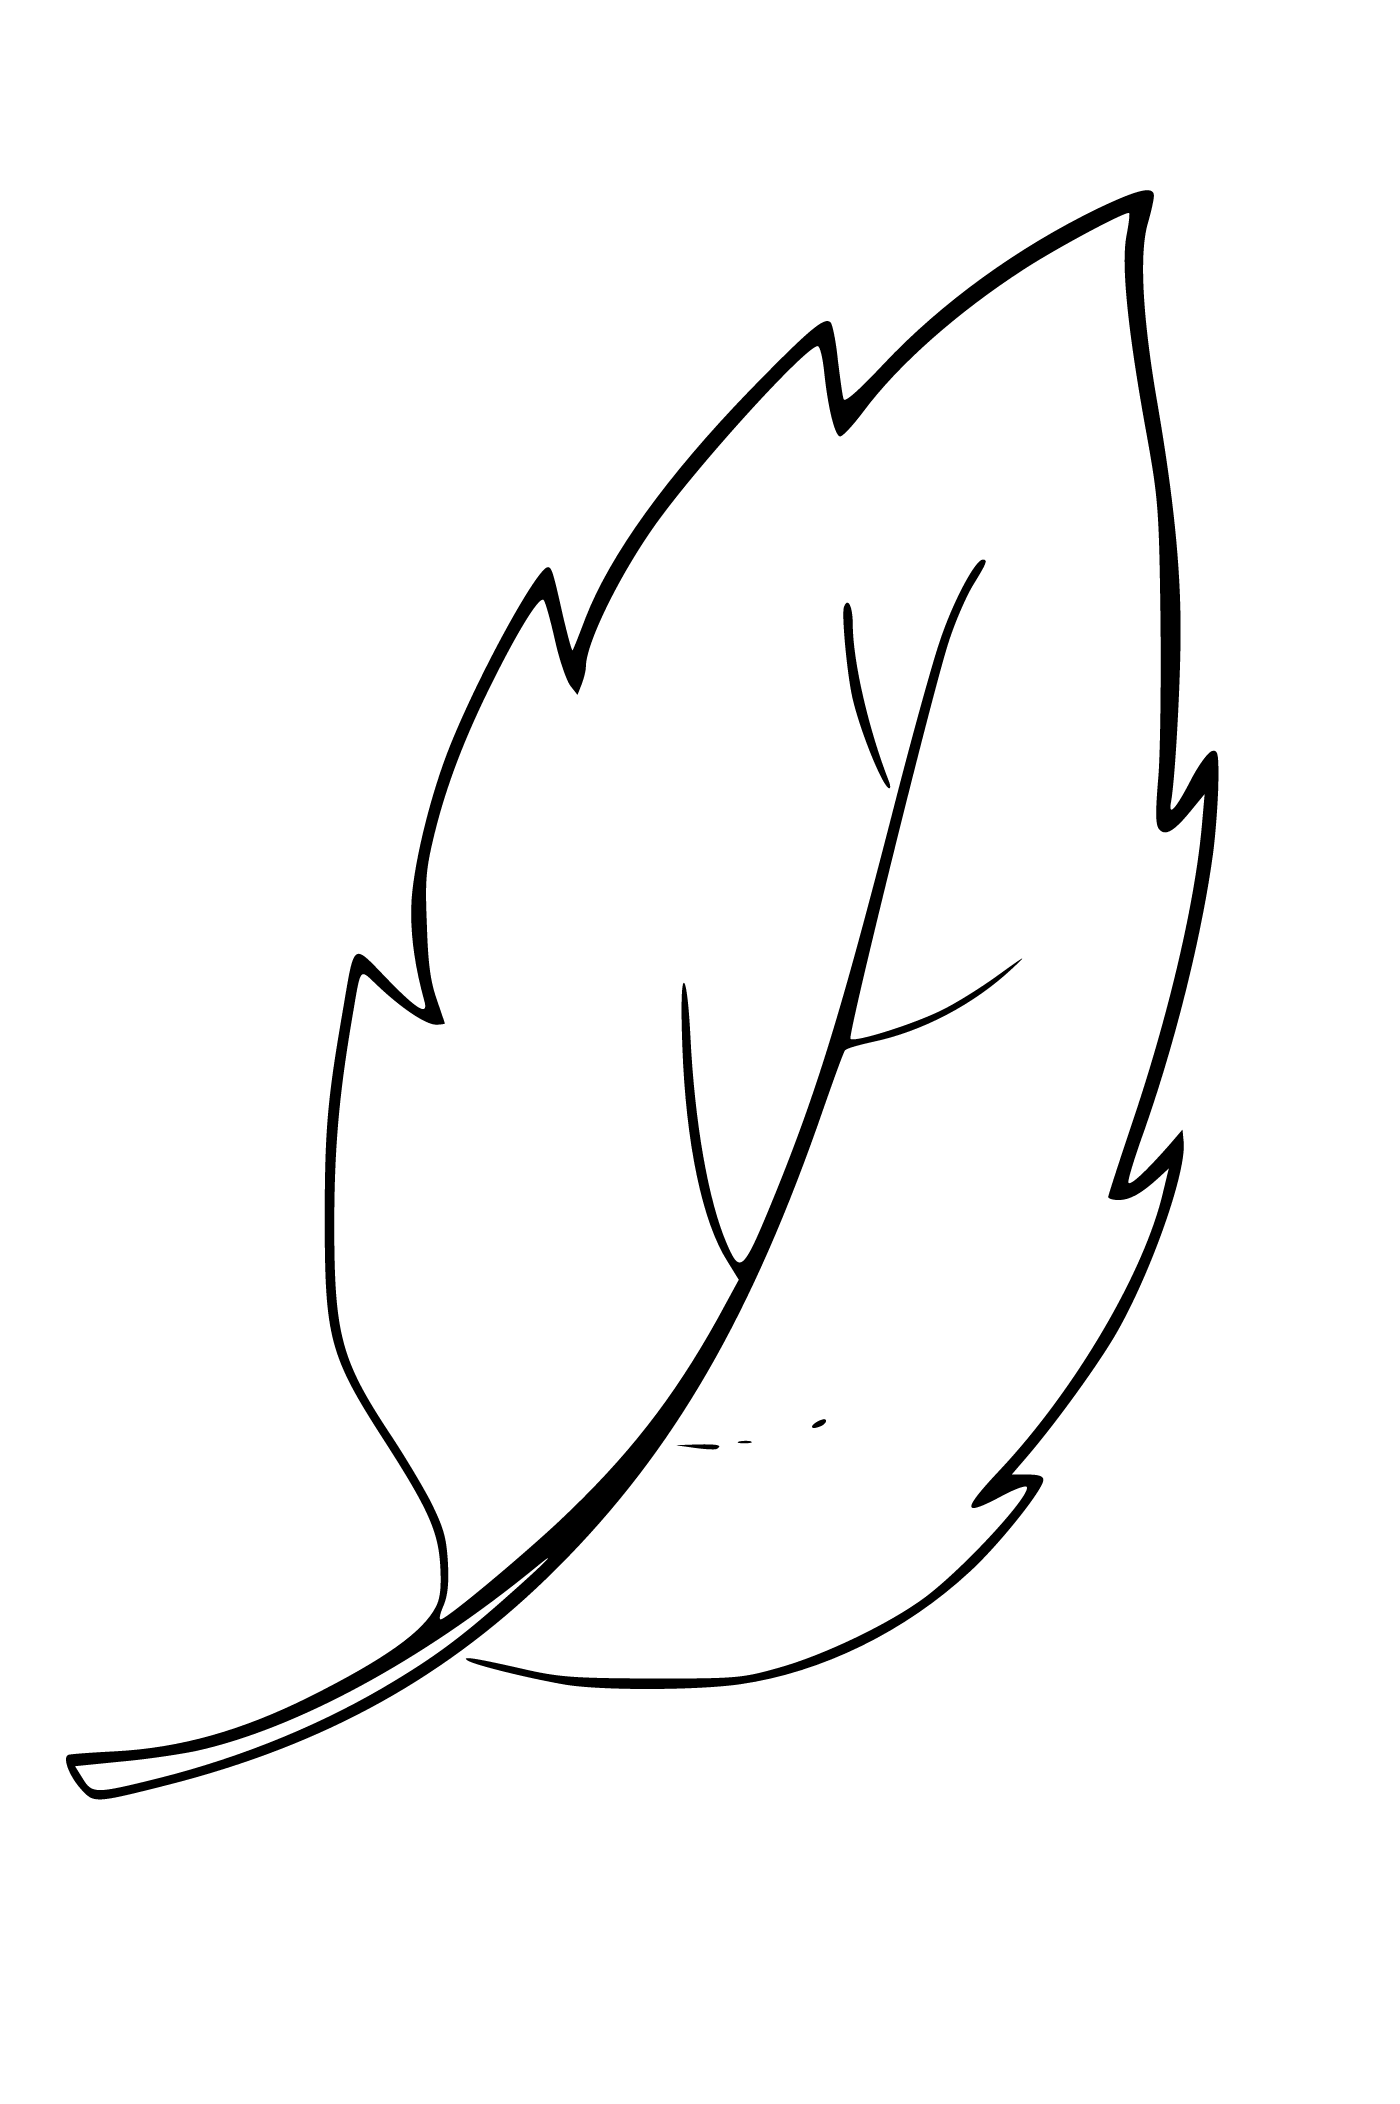 Printable Leaf Coloring Page for kids.